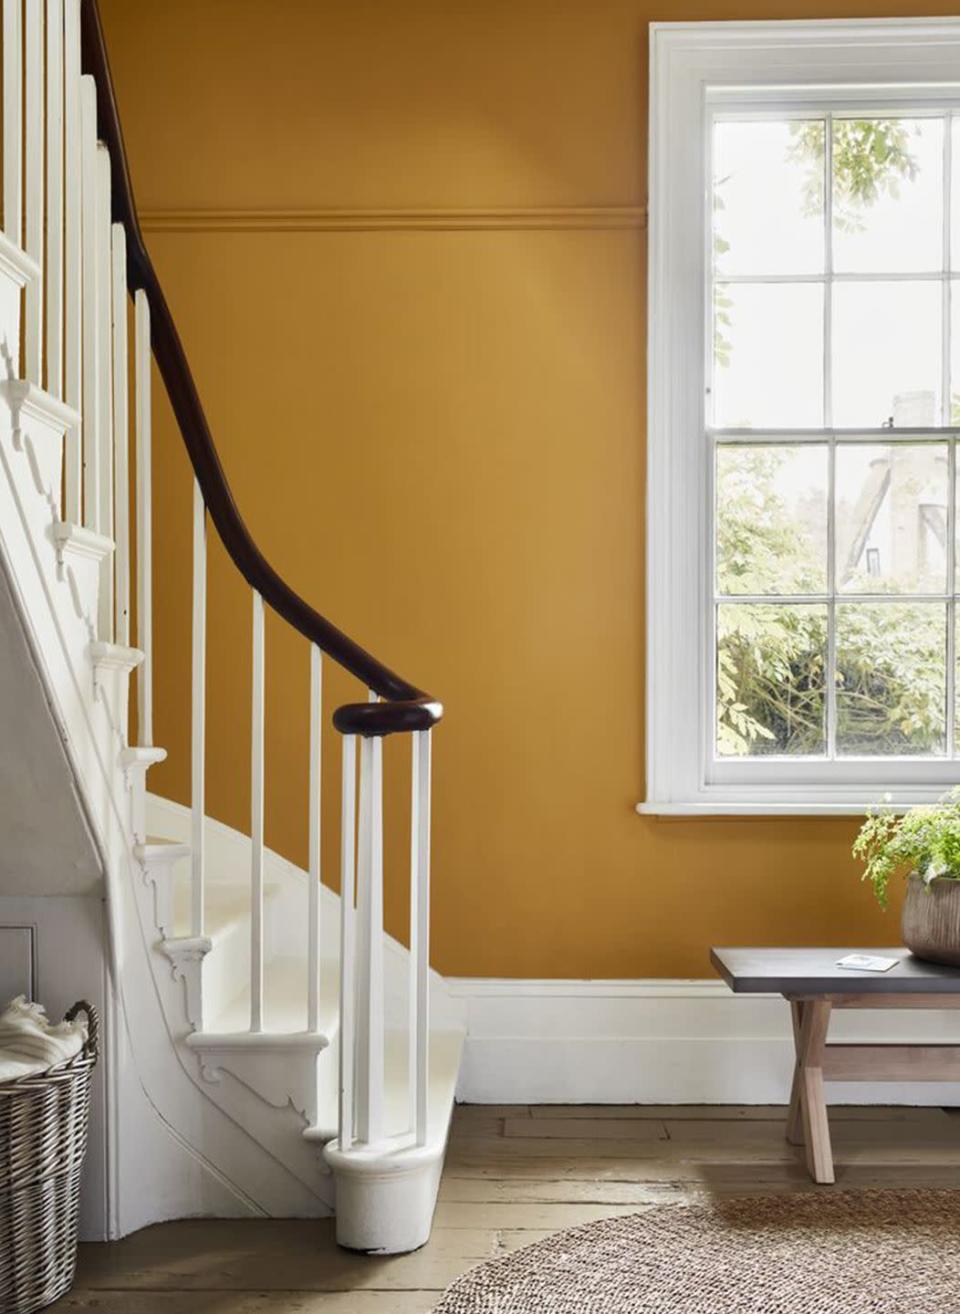 <p>'Hallways are typically smaller spaces, so we can afford to add more colour as we are merely passing through to our main living spaces,' says Gillian C. Rose, colour scientist, interior designer and founder of <a href="https://www.thescienceofcolor.com/" rel="nofollow noopener" target="_blank" data-ylk="slk:The Science of Colour" class="link ">The Science of Colour</a>. This warm sunshine shade is a particularly good choice for an uplifting welcome. </p><p>Pictured: <a href="https://www.homebase.co.uk/brands/house-beautiful/house-beautiful-paint-collection.list" rel="nofollow noopener" target="_blank" data-ylk="slk:House Beautiful Earth Notes EN.06 Paint at Homebase" class="link ">House Beautiful Earth Notes EN.06 Paint at Homebase</a></p>